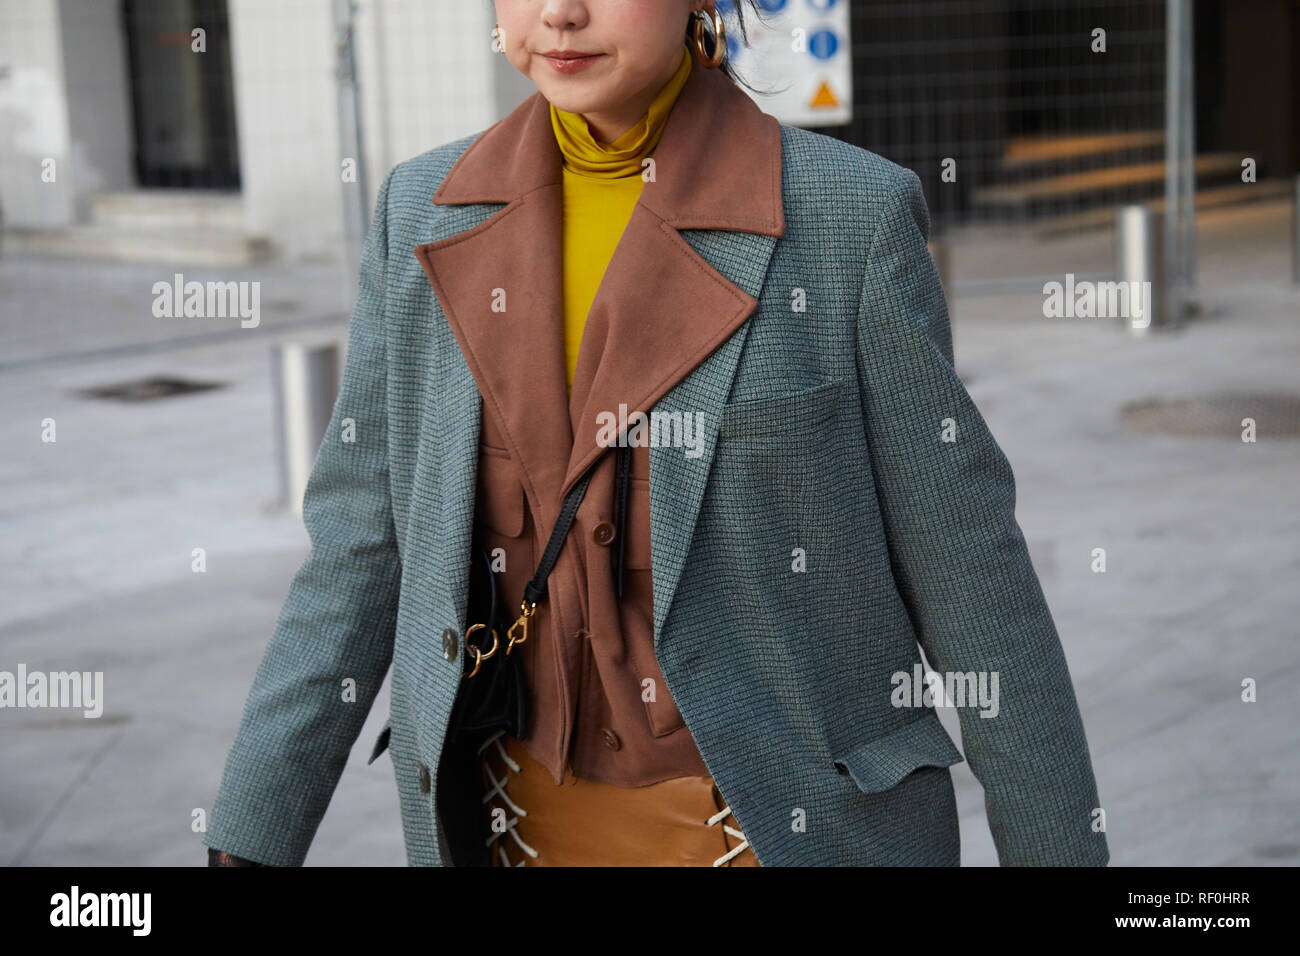 MILAN, ITALY - JANUARY 12, 2019: Woman with brown jacket and yellow turtleneck before Neil Barrett fashion show, Milan Fashion Week street style Stock Photo